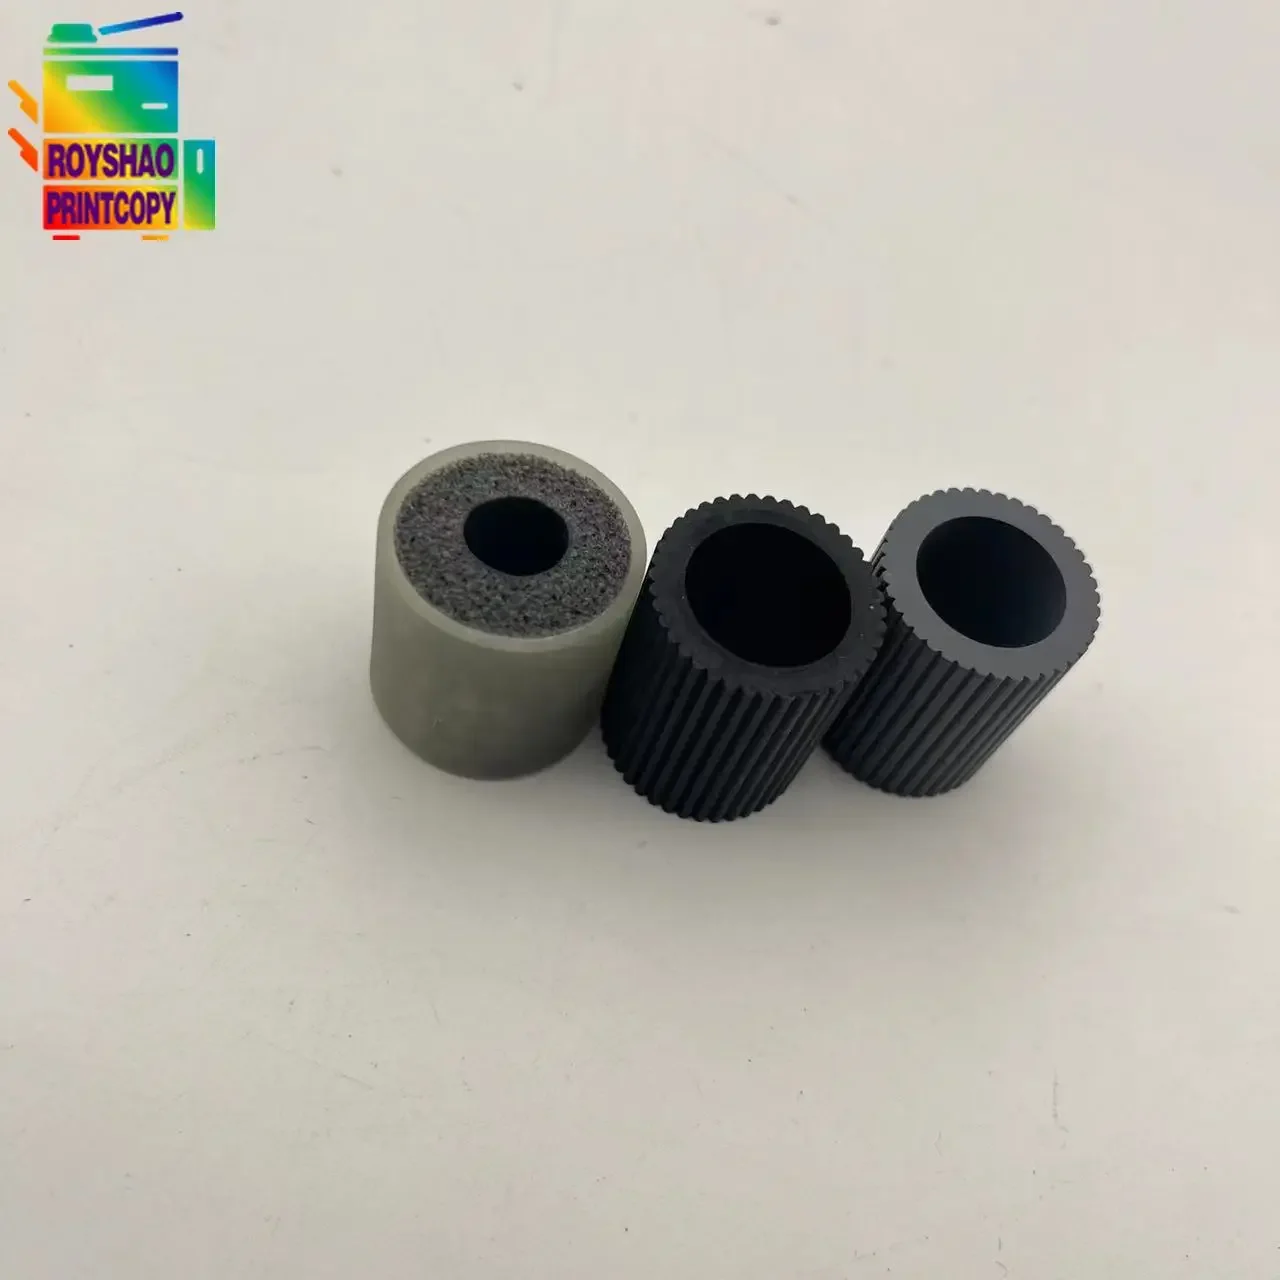 

WC5945 ADF Pickup Roller Kit Rubber for Xerox WorkCentre 5845 5855 5865 5875 5890 5945i 5955i 5945 5955 059K85120 059K85121